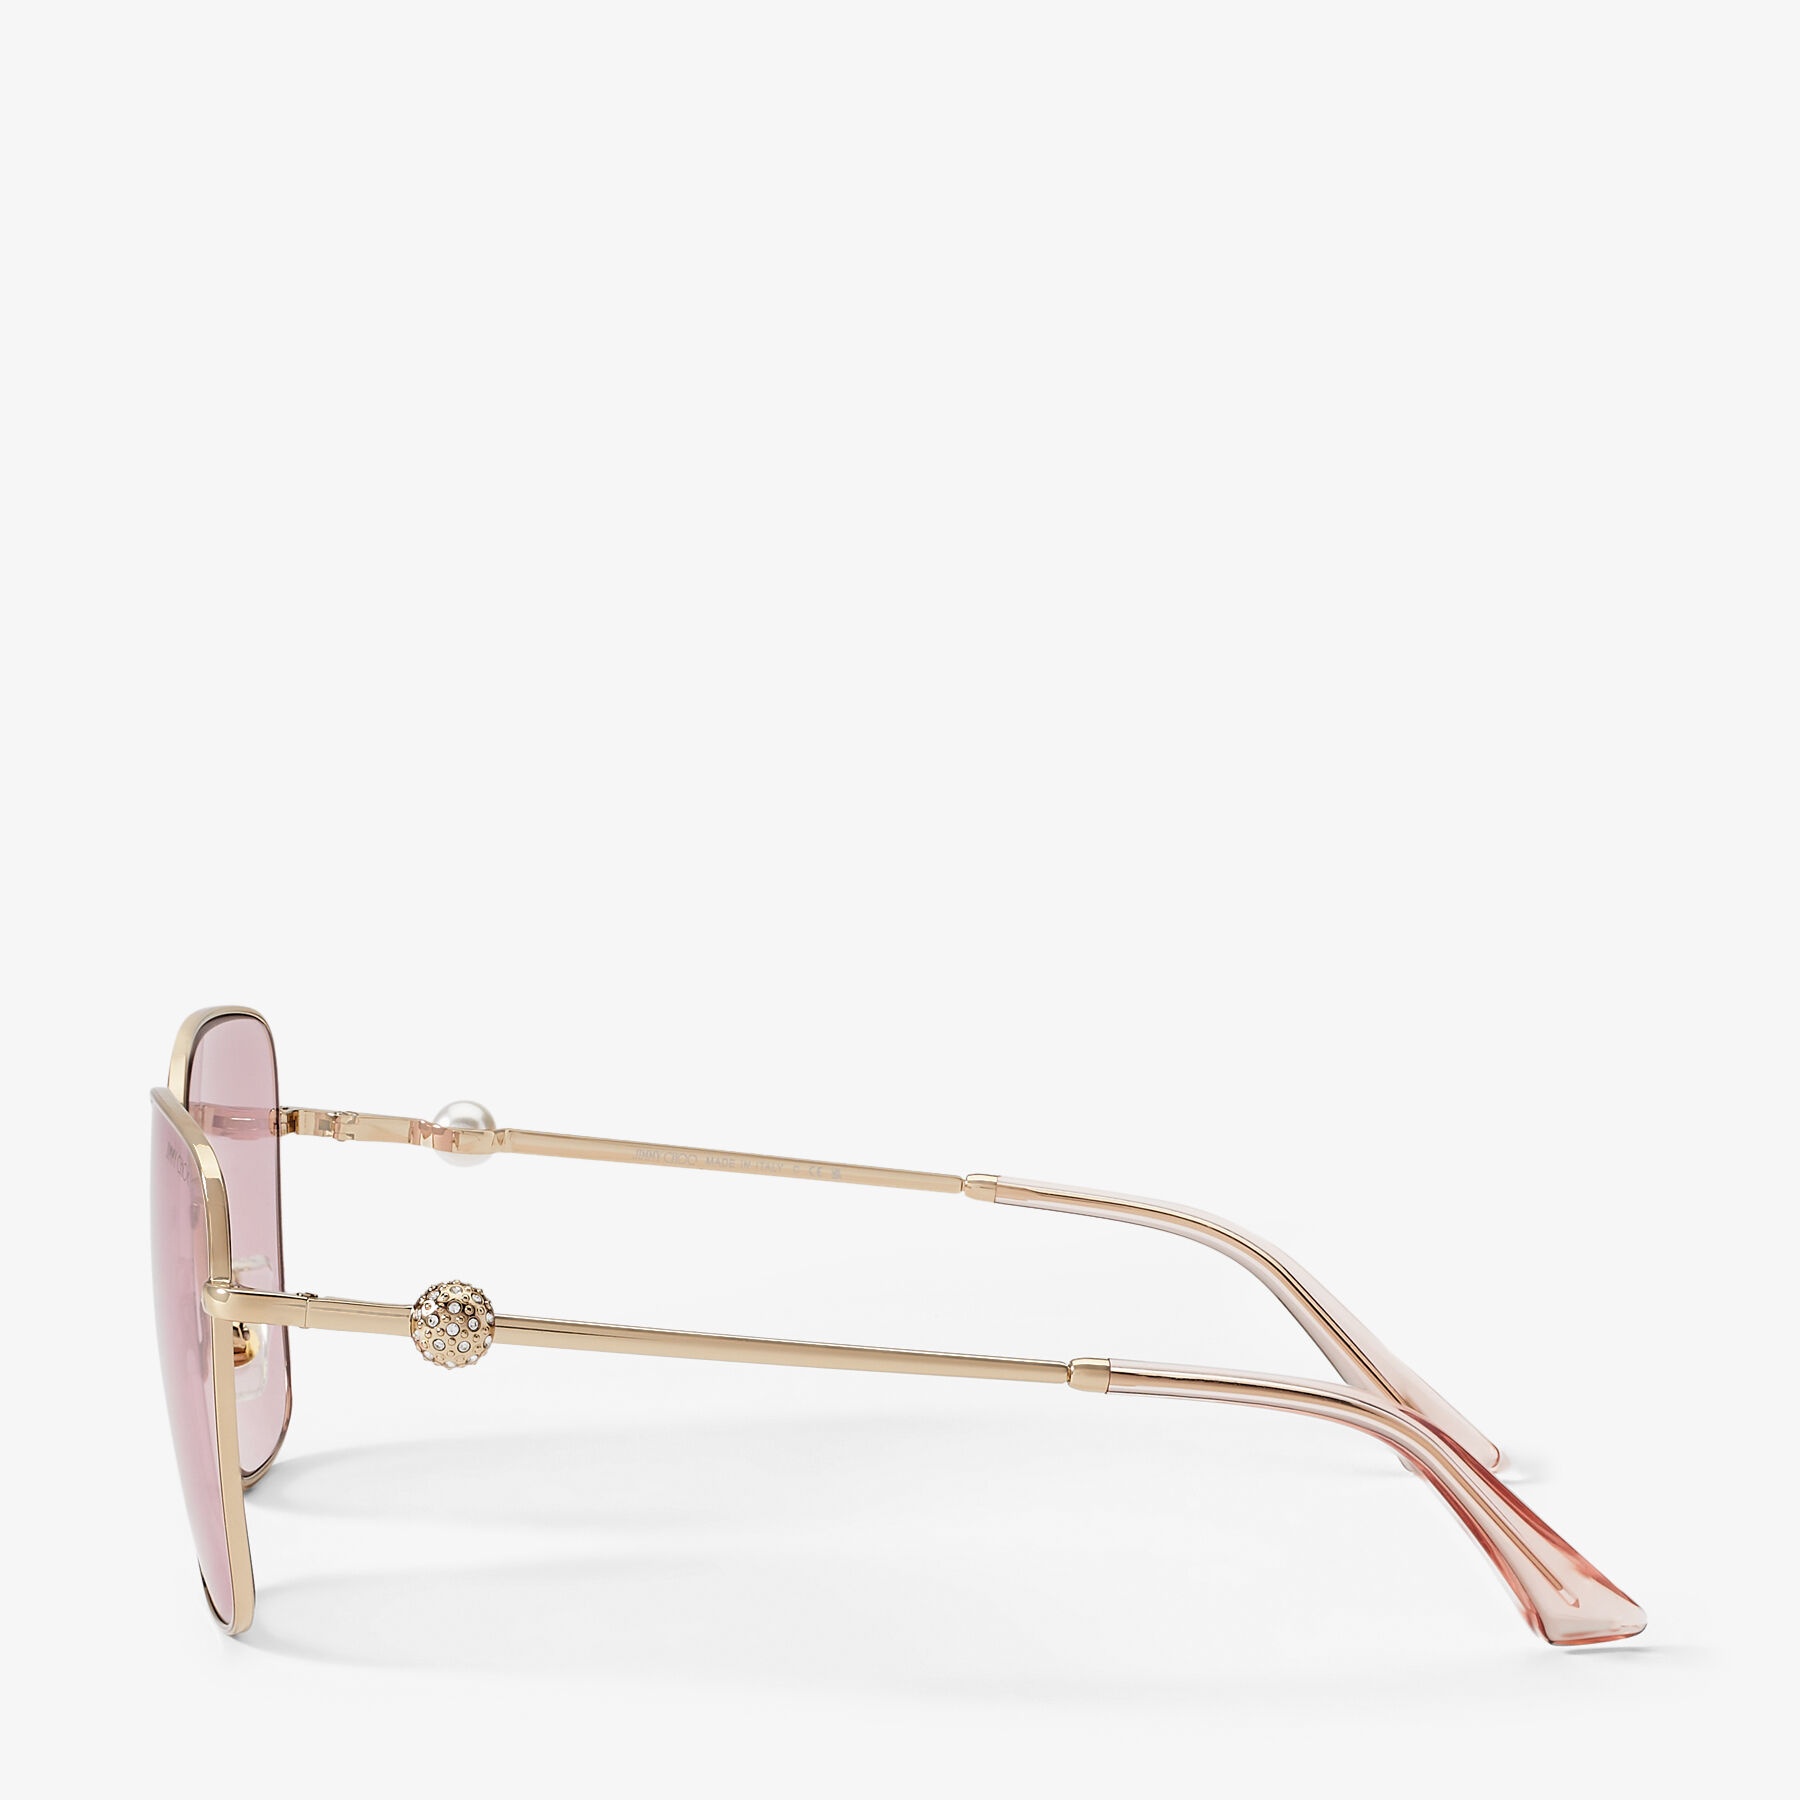 Pua
Pale Gold Square Sunglasses with Crystals - 4